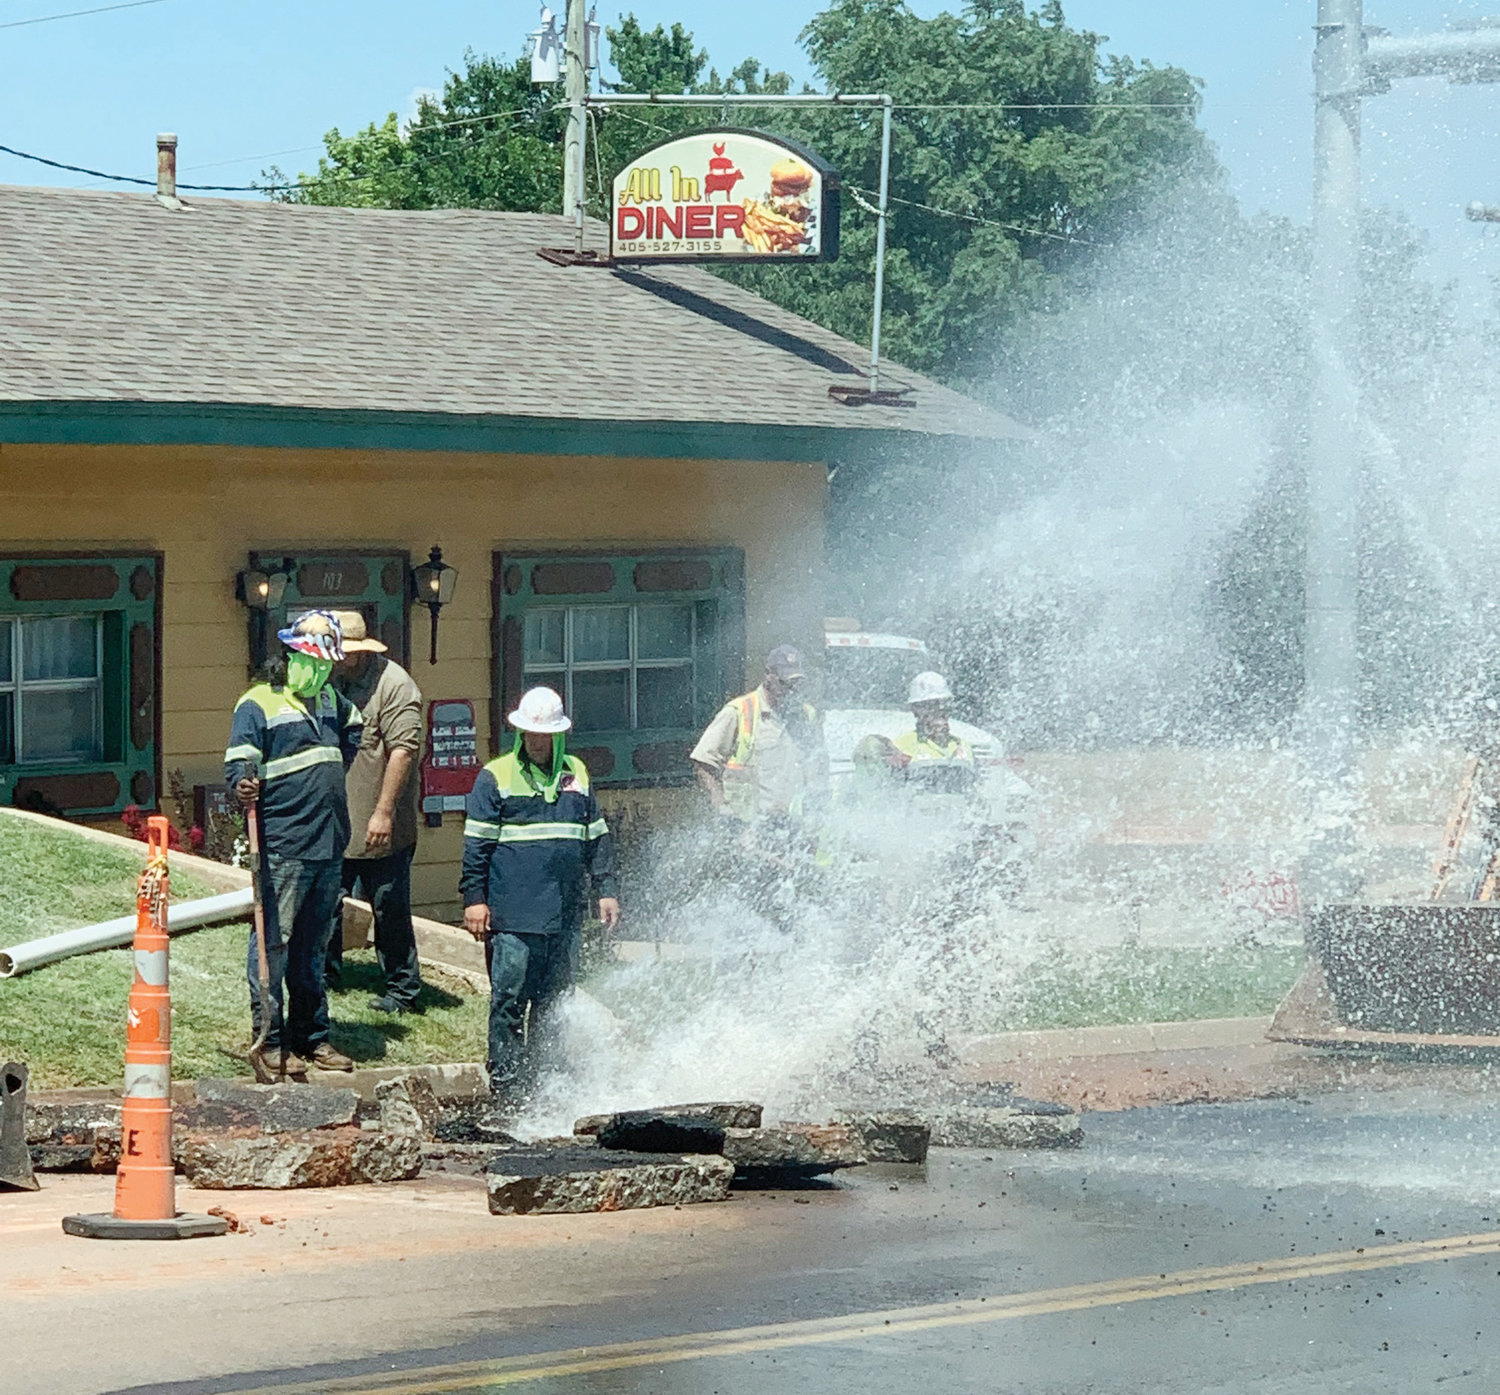 City of Purcell crews worked Thursday to repair a water main break along Washington Street. Heat was to blame for expanding pavement, which ruptured the line.